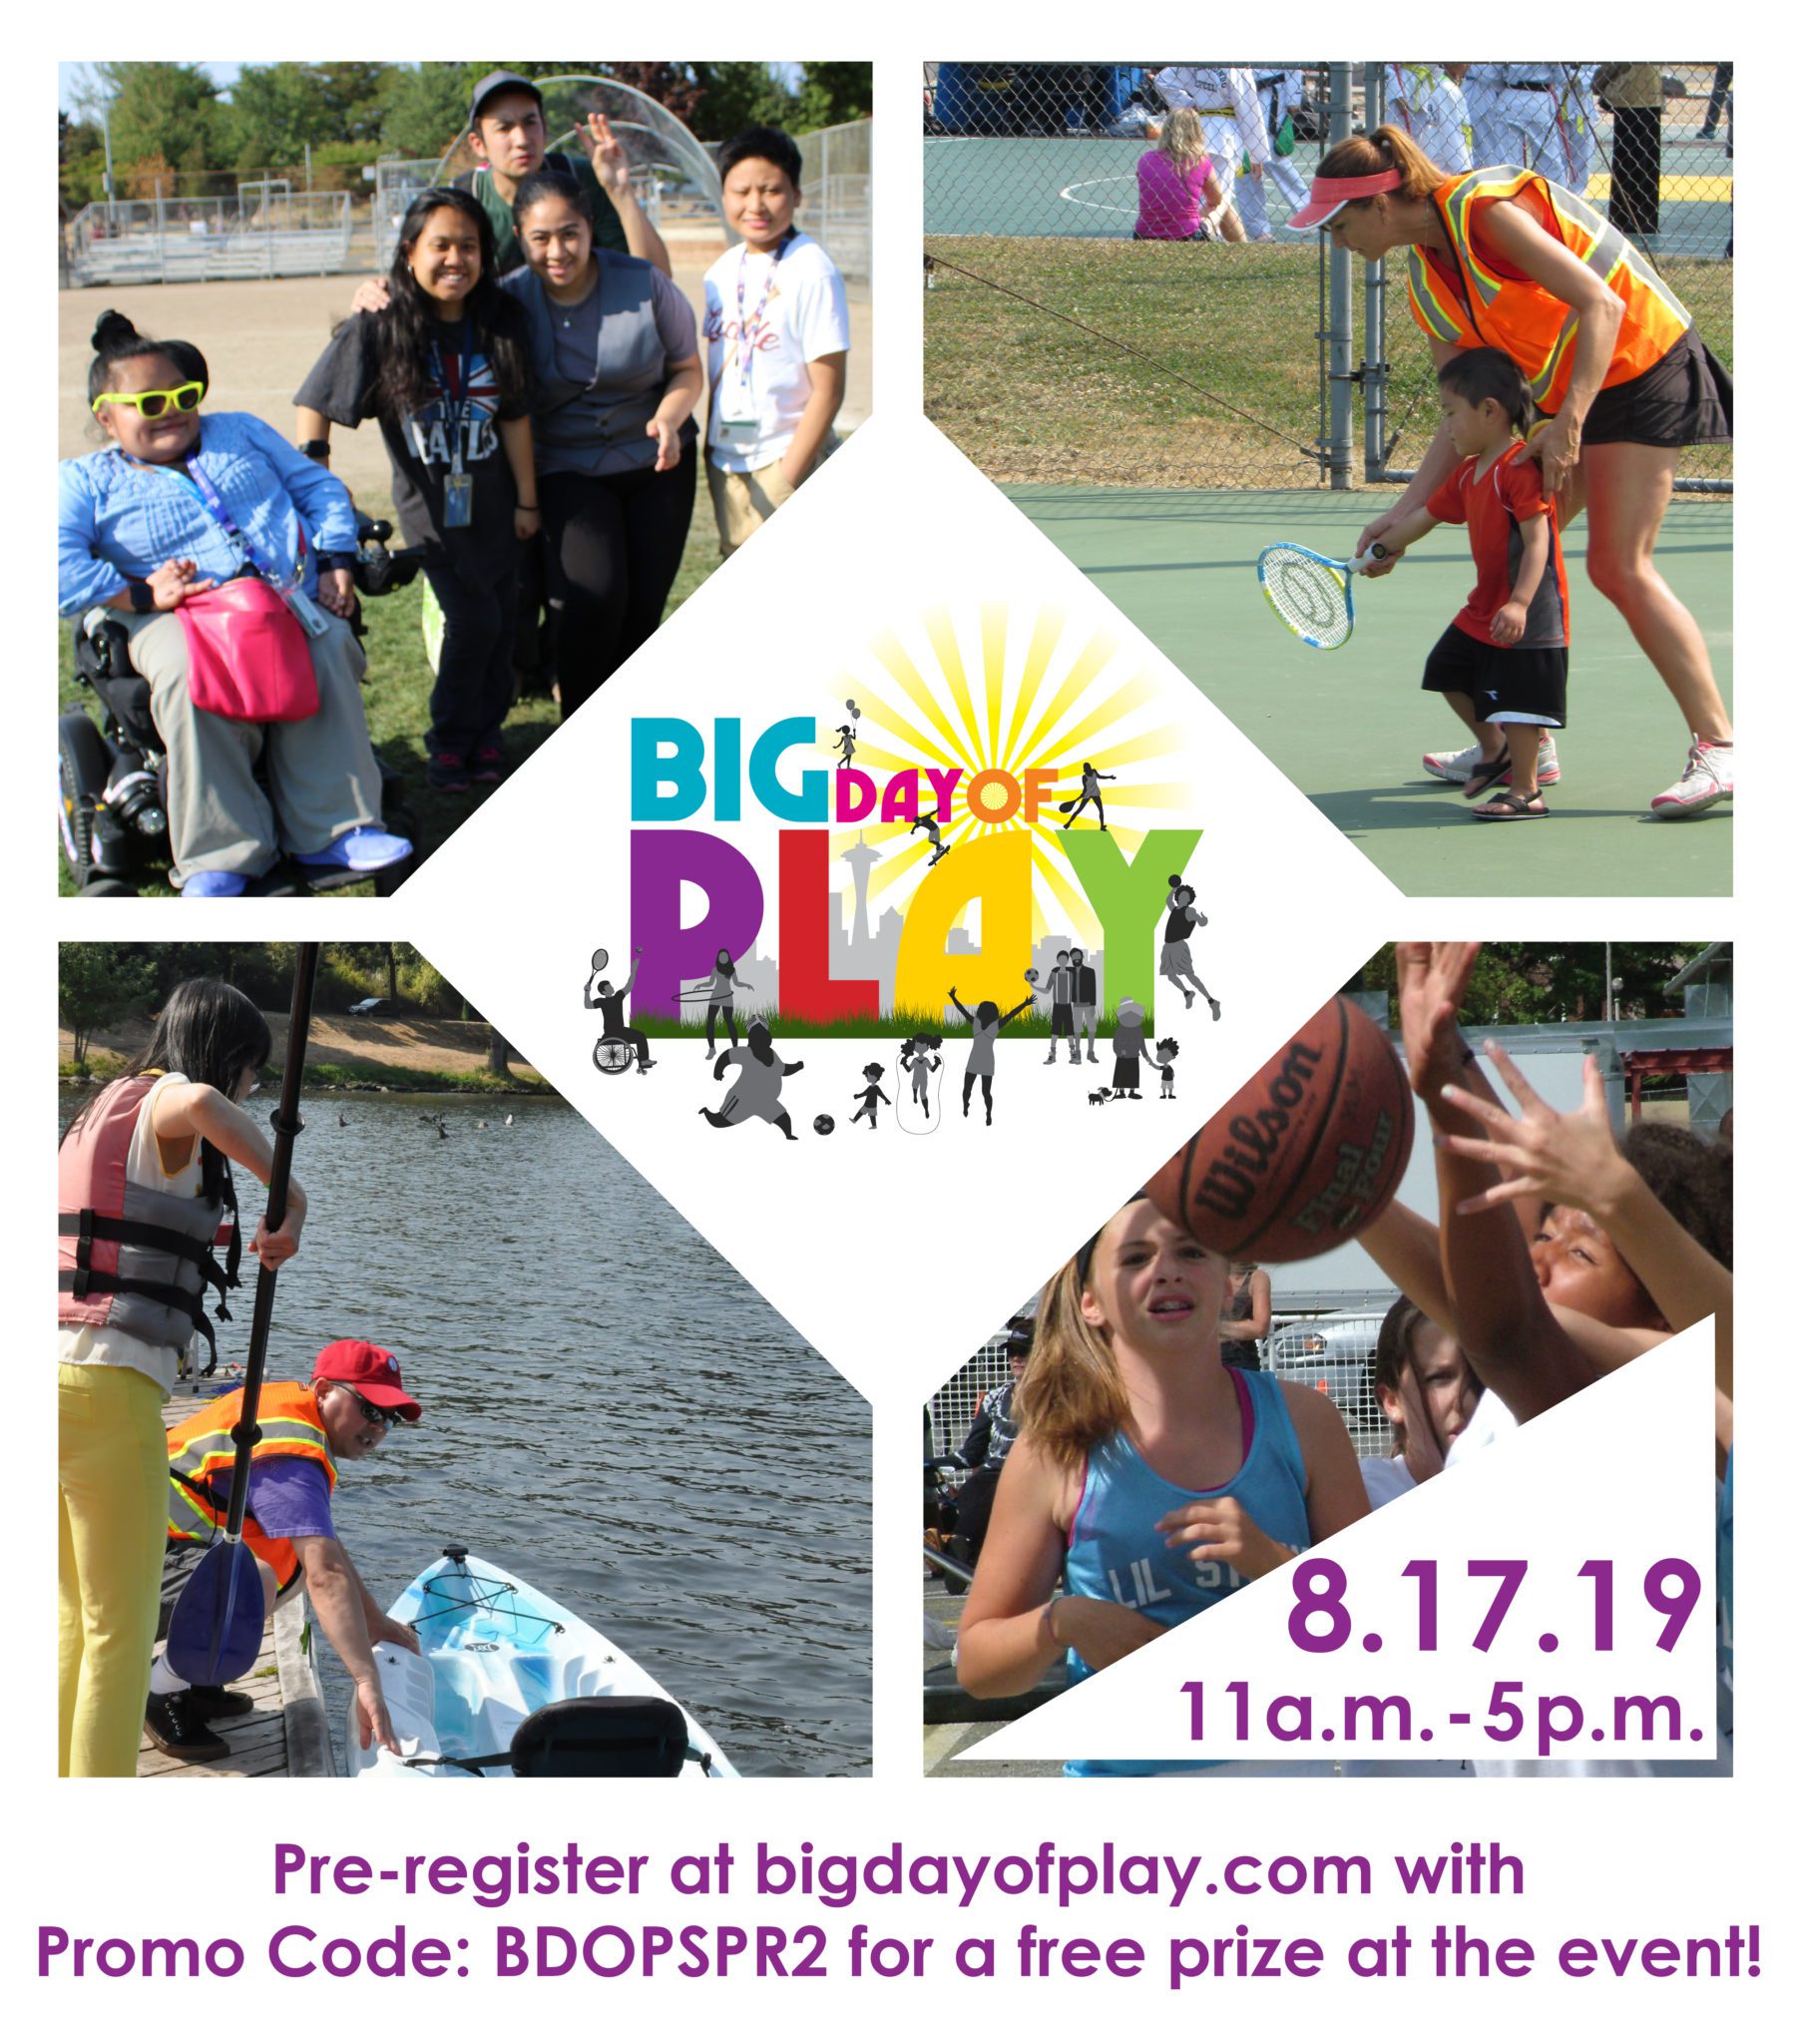 Big Day of Play is Aug. 17! Preregister for this FREE event to get a